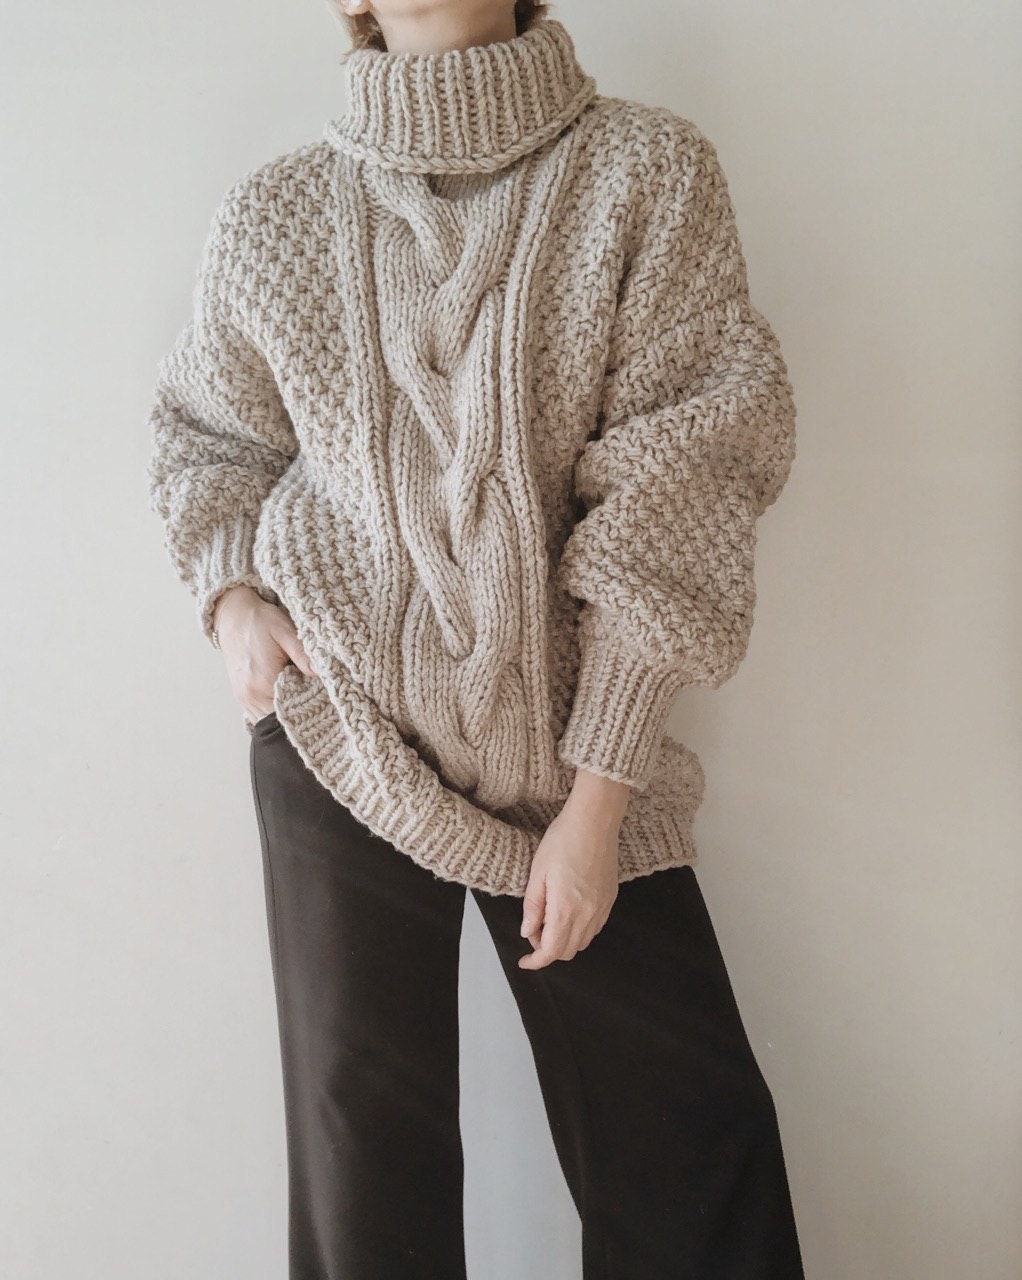 Hand knit sweater for women, Chunky knit sweater, Oversized knit